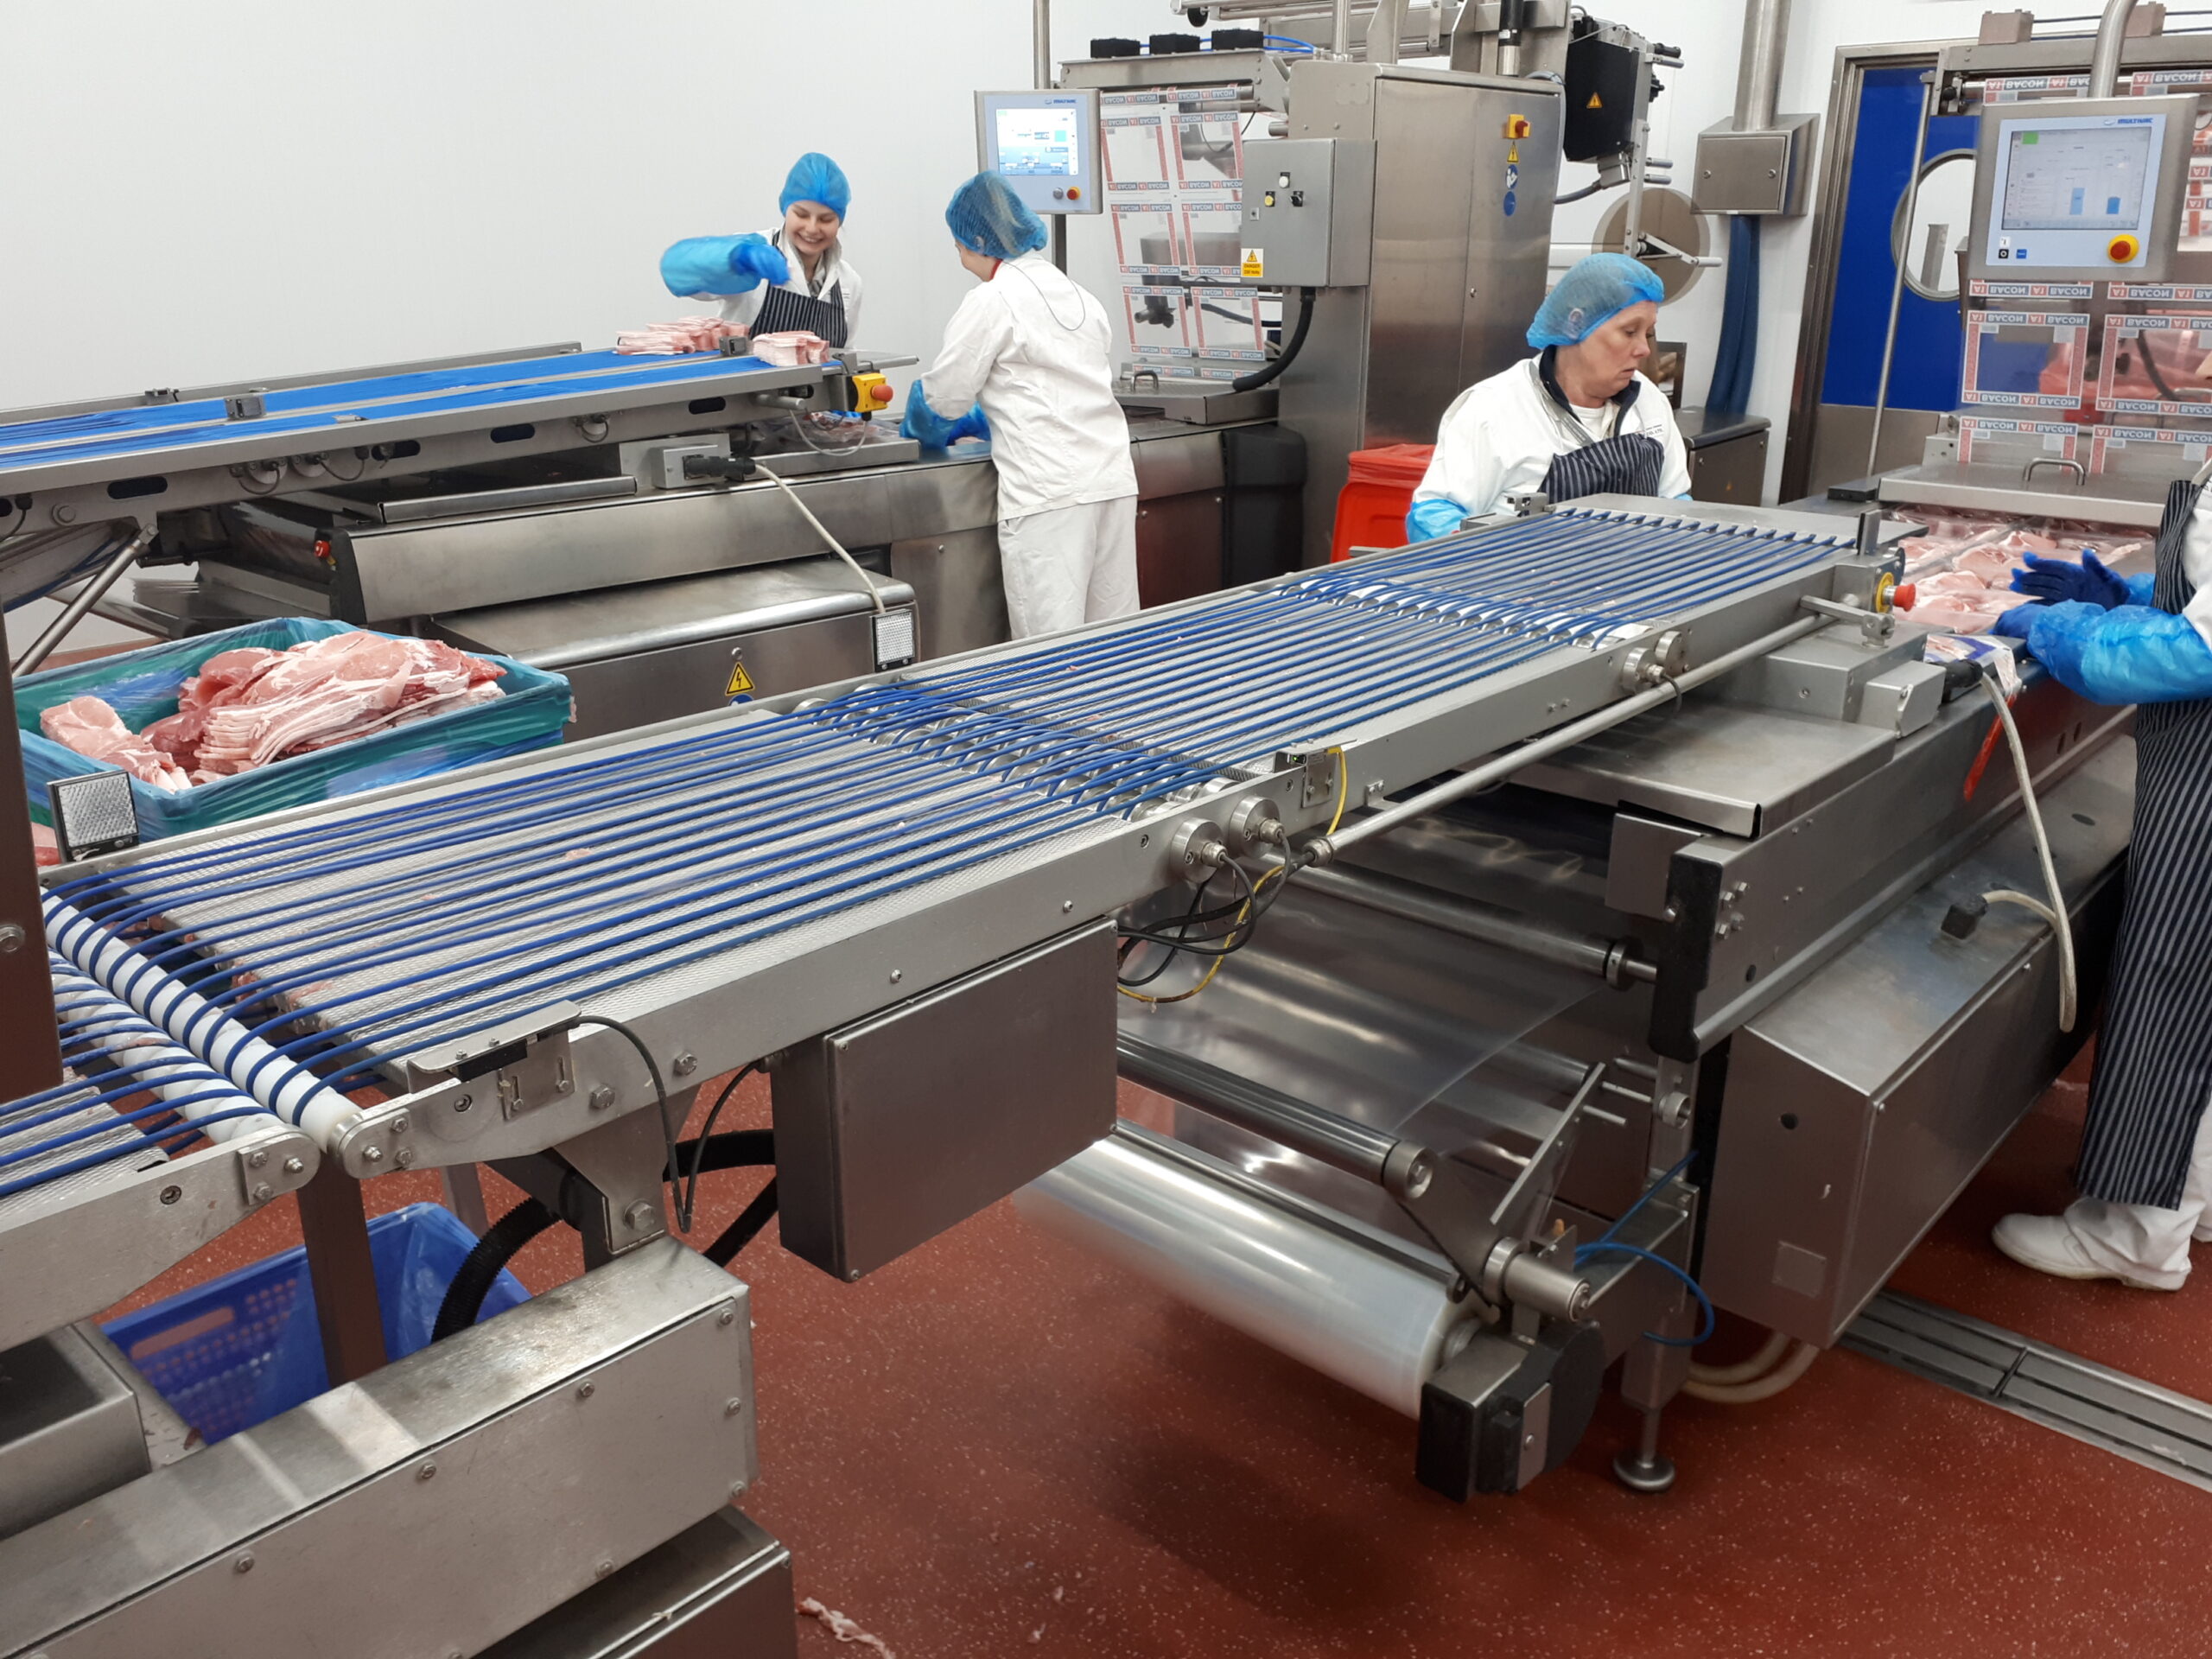 polycord conveyors from Wrightfield Conveyor Systems